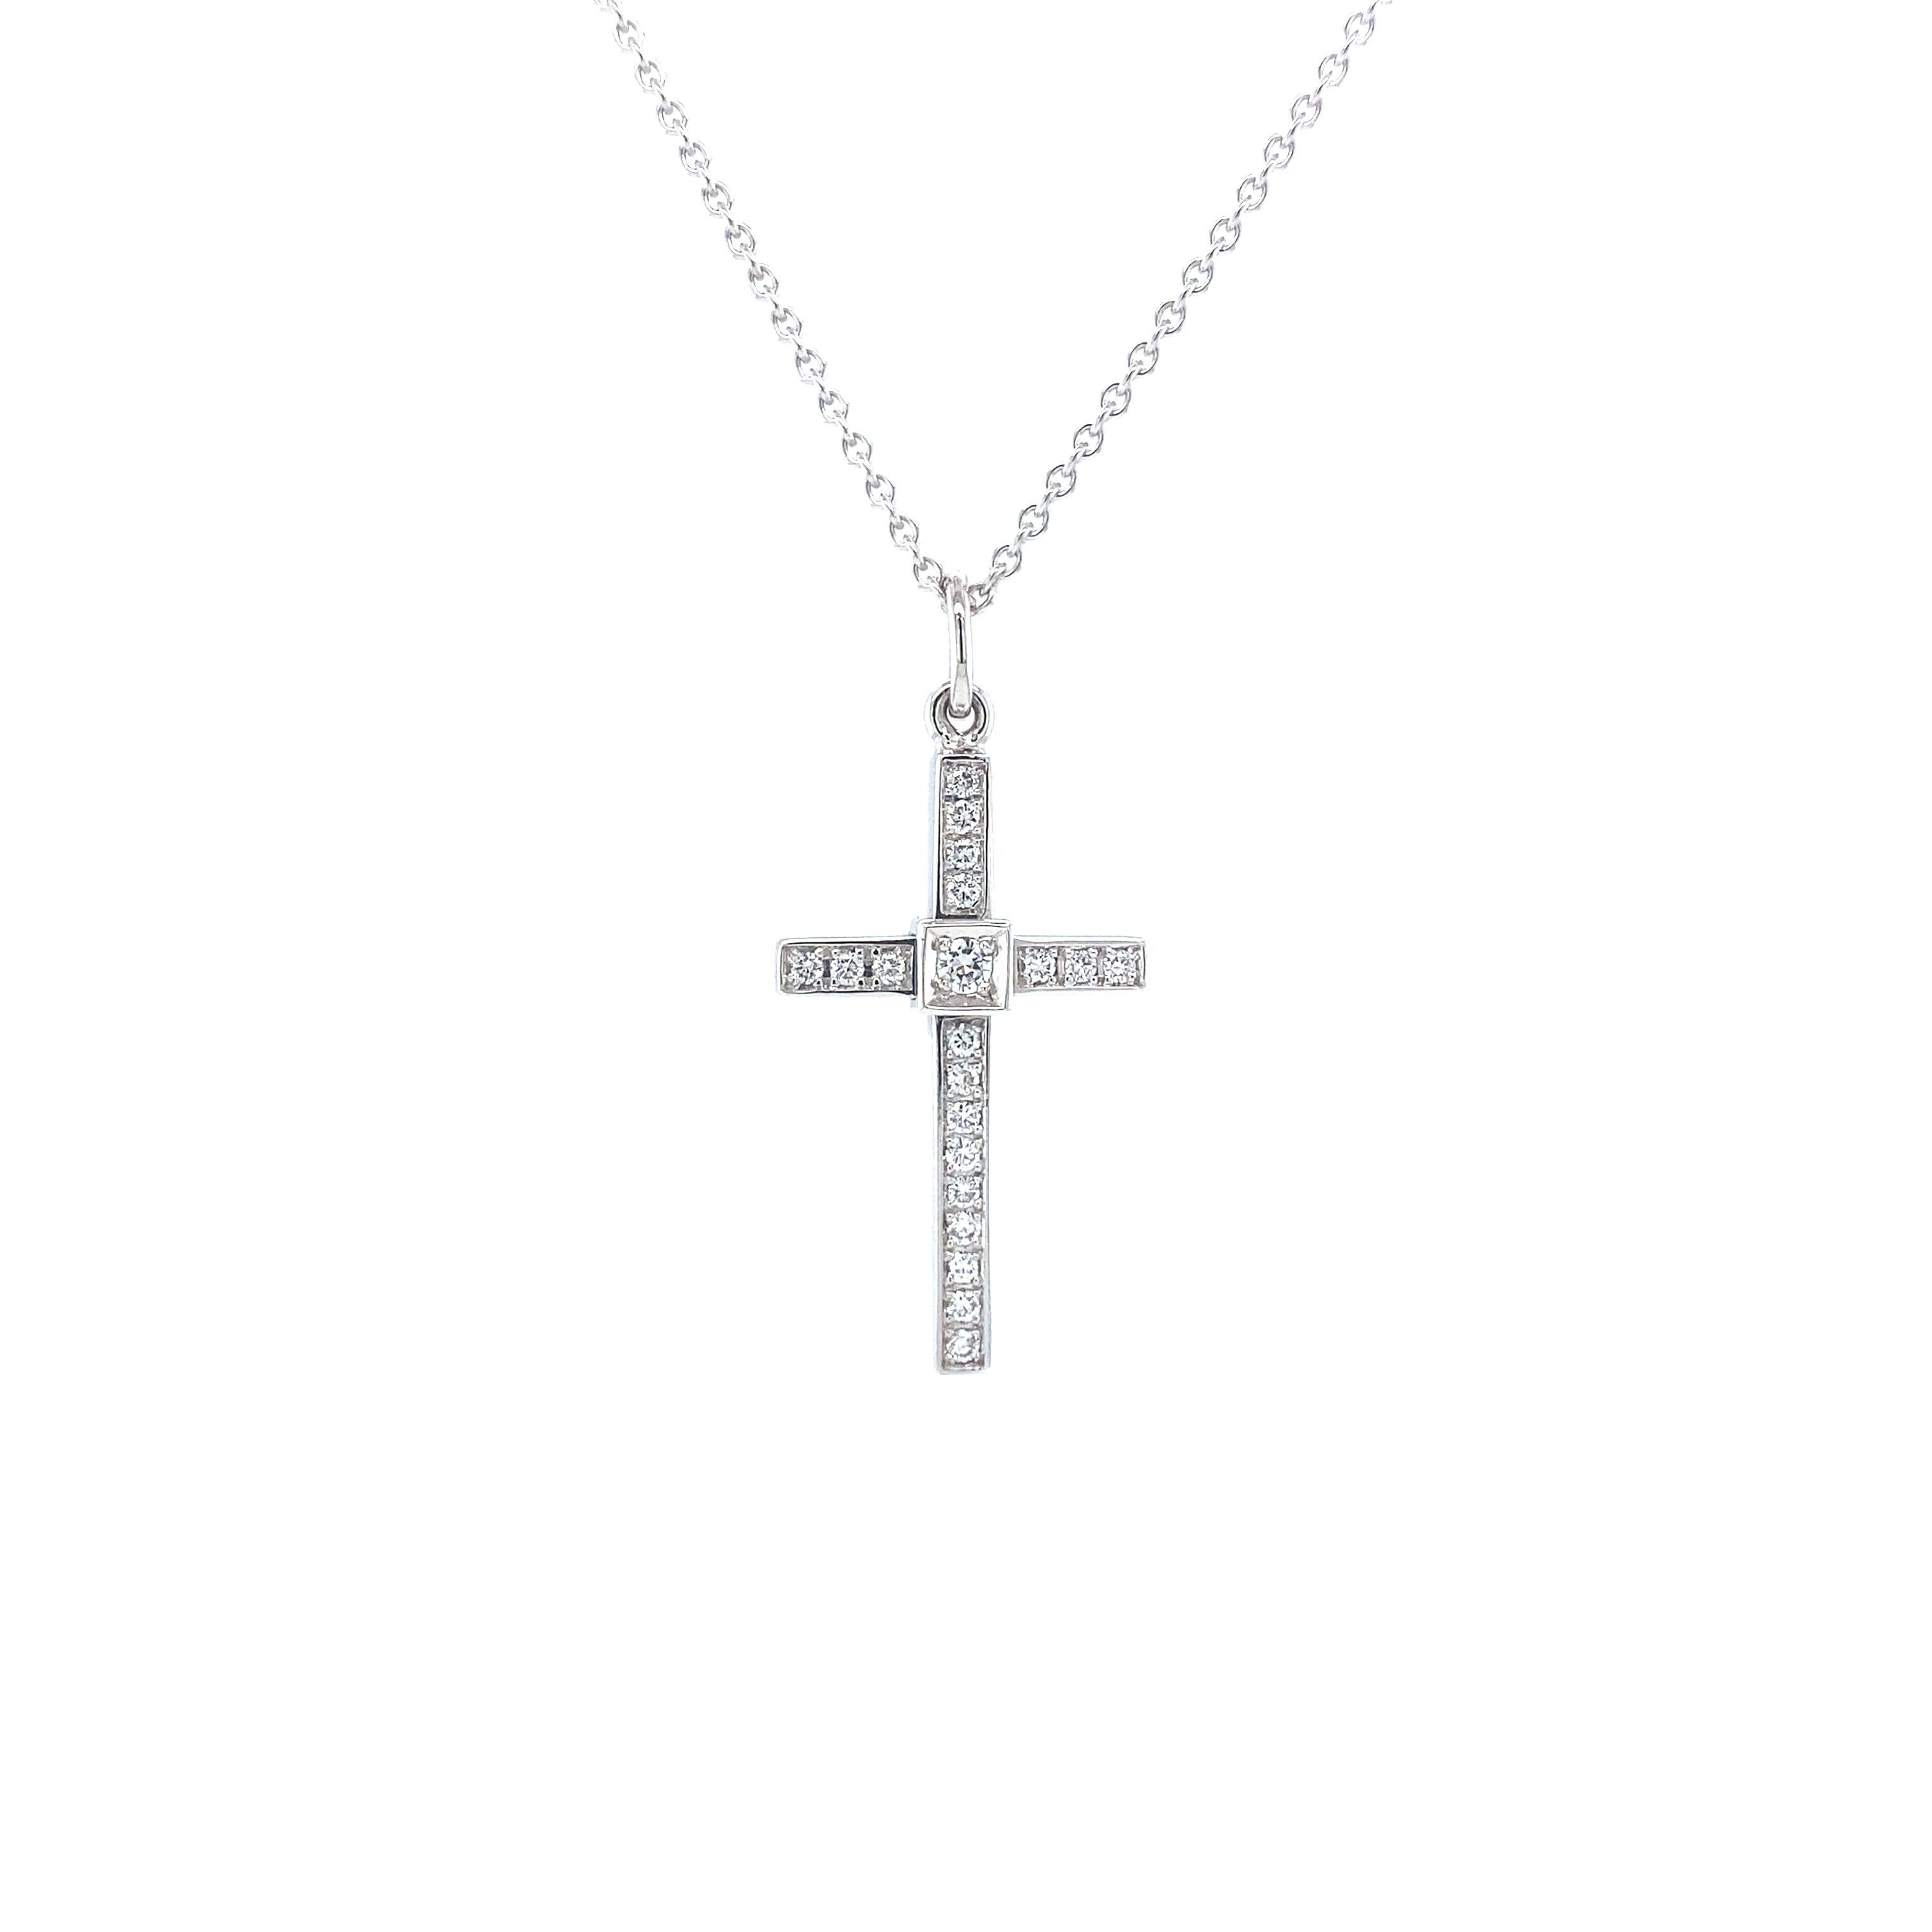 Victor Mayer cross pendant necklace 18k white gold, Hallmark Collection, 21 diamonds, total 0.25 ct, H VS, height with eyelet app. 42.5 mm

About the creator Victor Mayer
Victor Mayer is internationally renowned for elegant timeless designs and